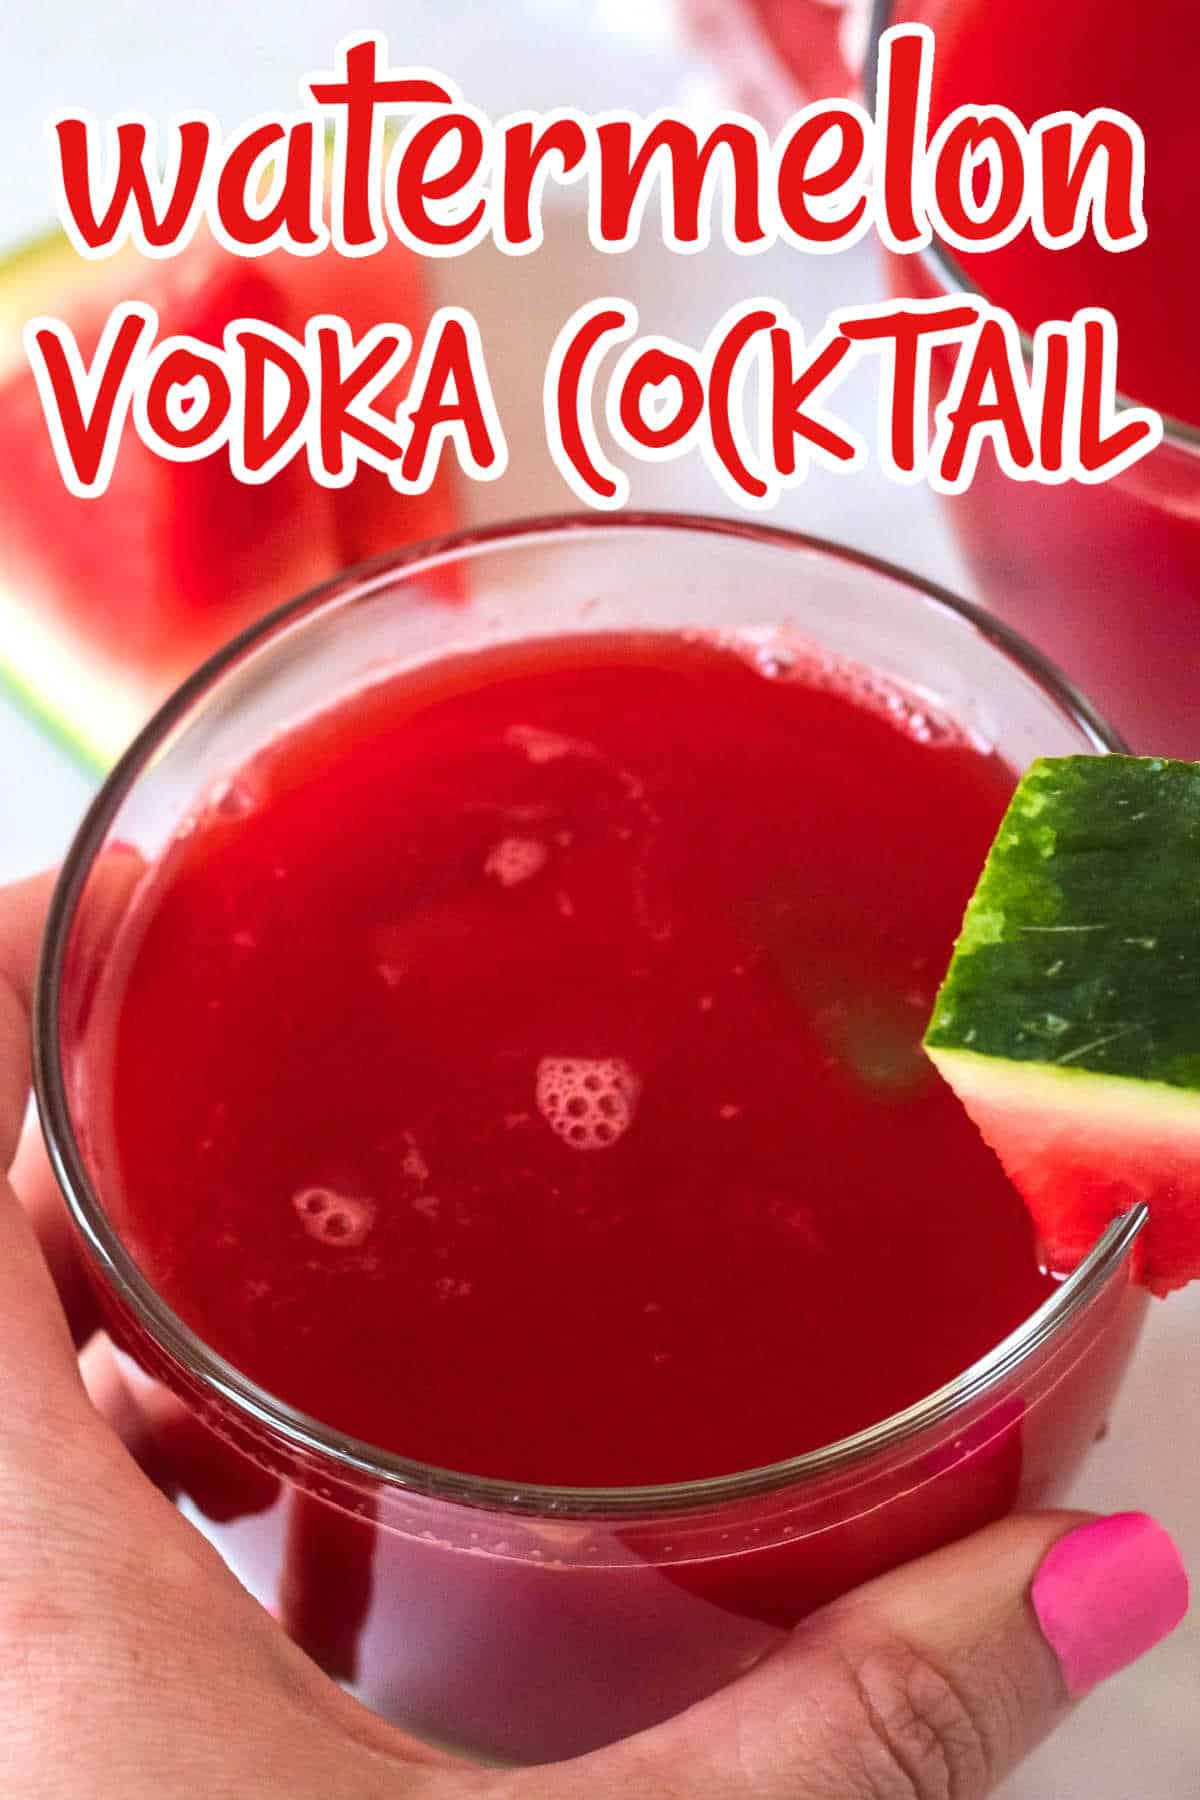 A hand is holding a watermelon red cocktail very close to the camera lens with a watermelon wedge as garnish.